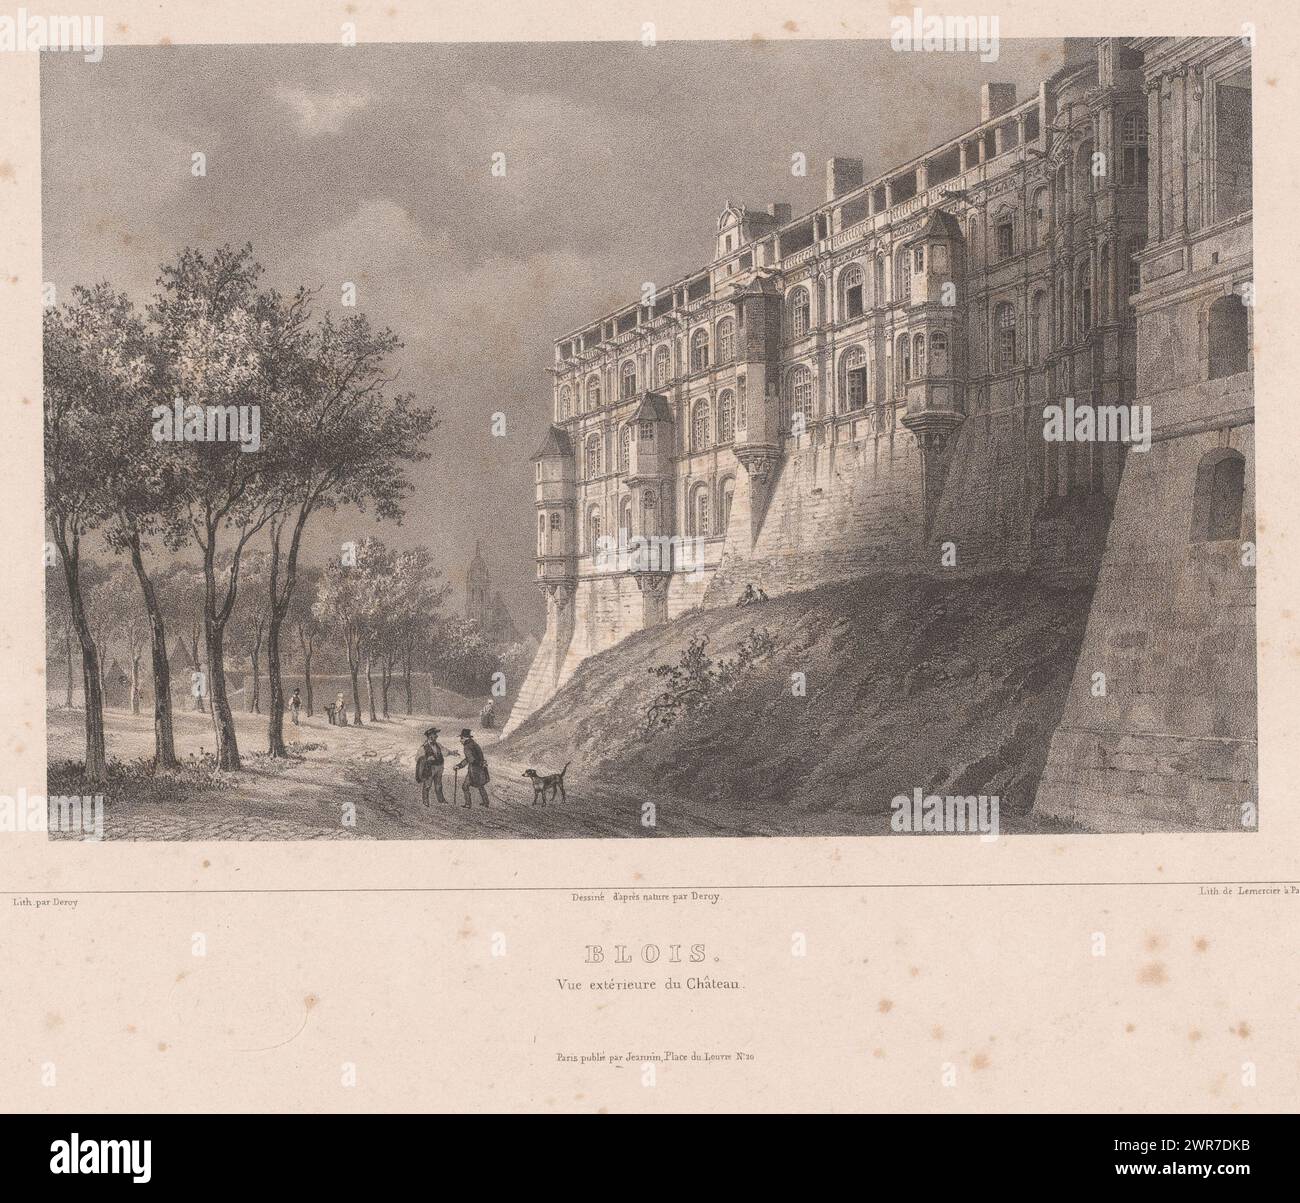 View of the facade with the lodges of the castle of Blois, Blois. Vue extérieure du Château (title on object), Sights in France (series title), La France (series title on object), print maker: Isodore-Laurent Deroy, after drawing by: Isodore-Laurent Deroy, printer: Benard Lemercier & Cie, print maker: Paris, after drawing by: Blois, printer: Paris, publisher: Paris, 1834, paper, height 289 mm × width 433 mm, print Stock Photo